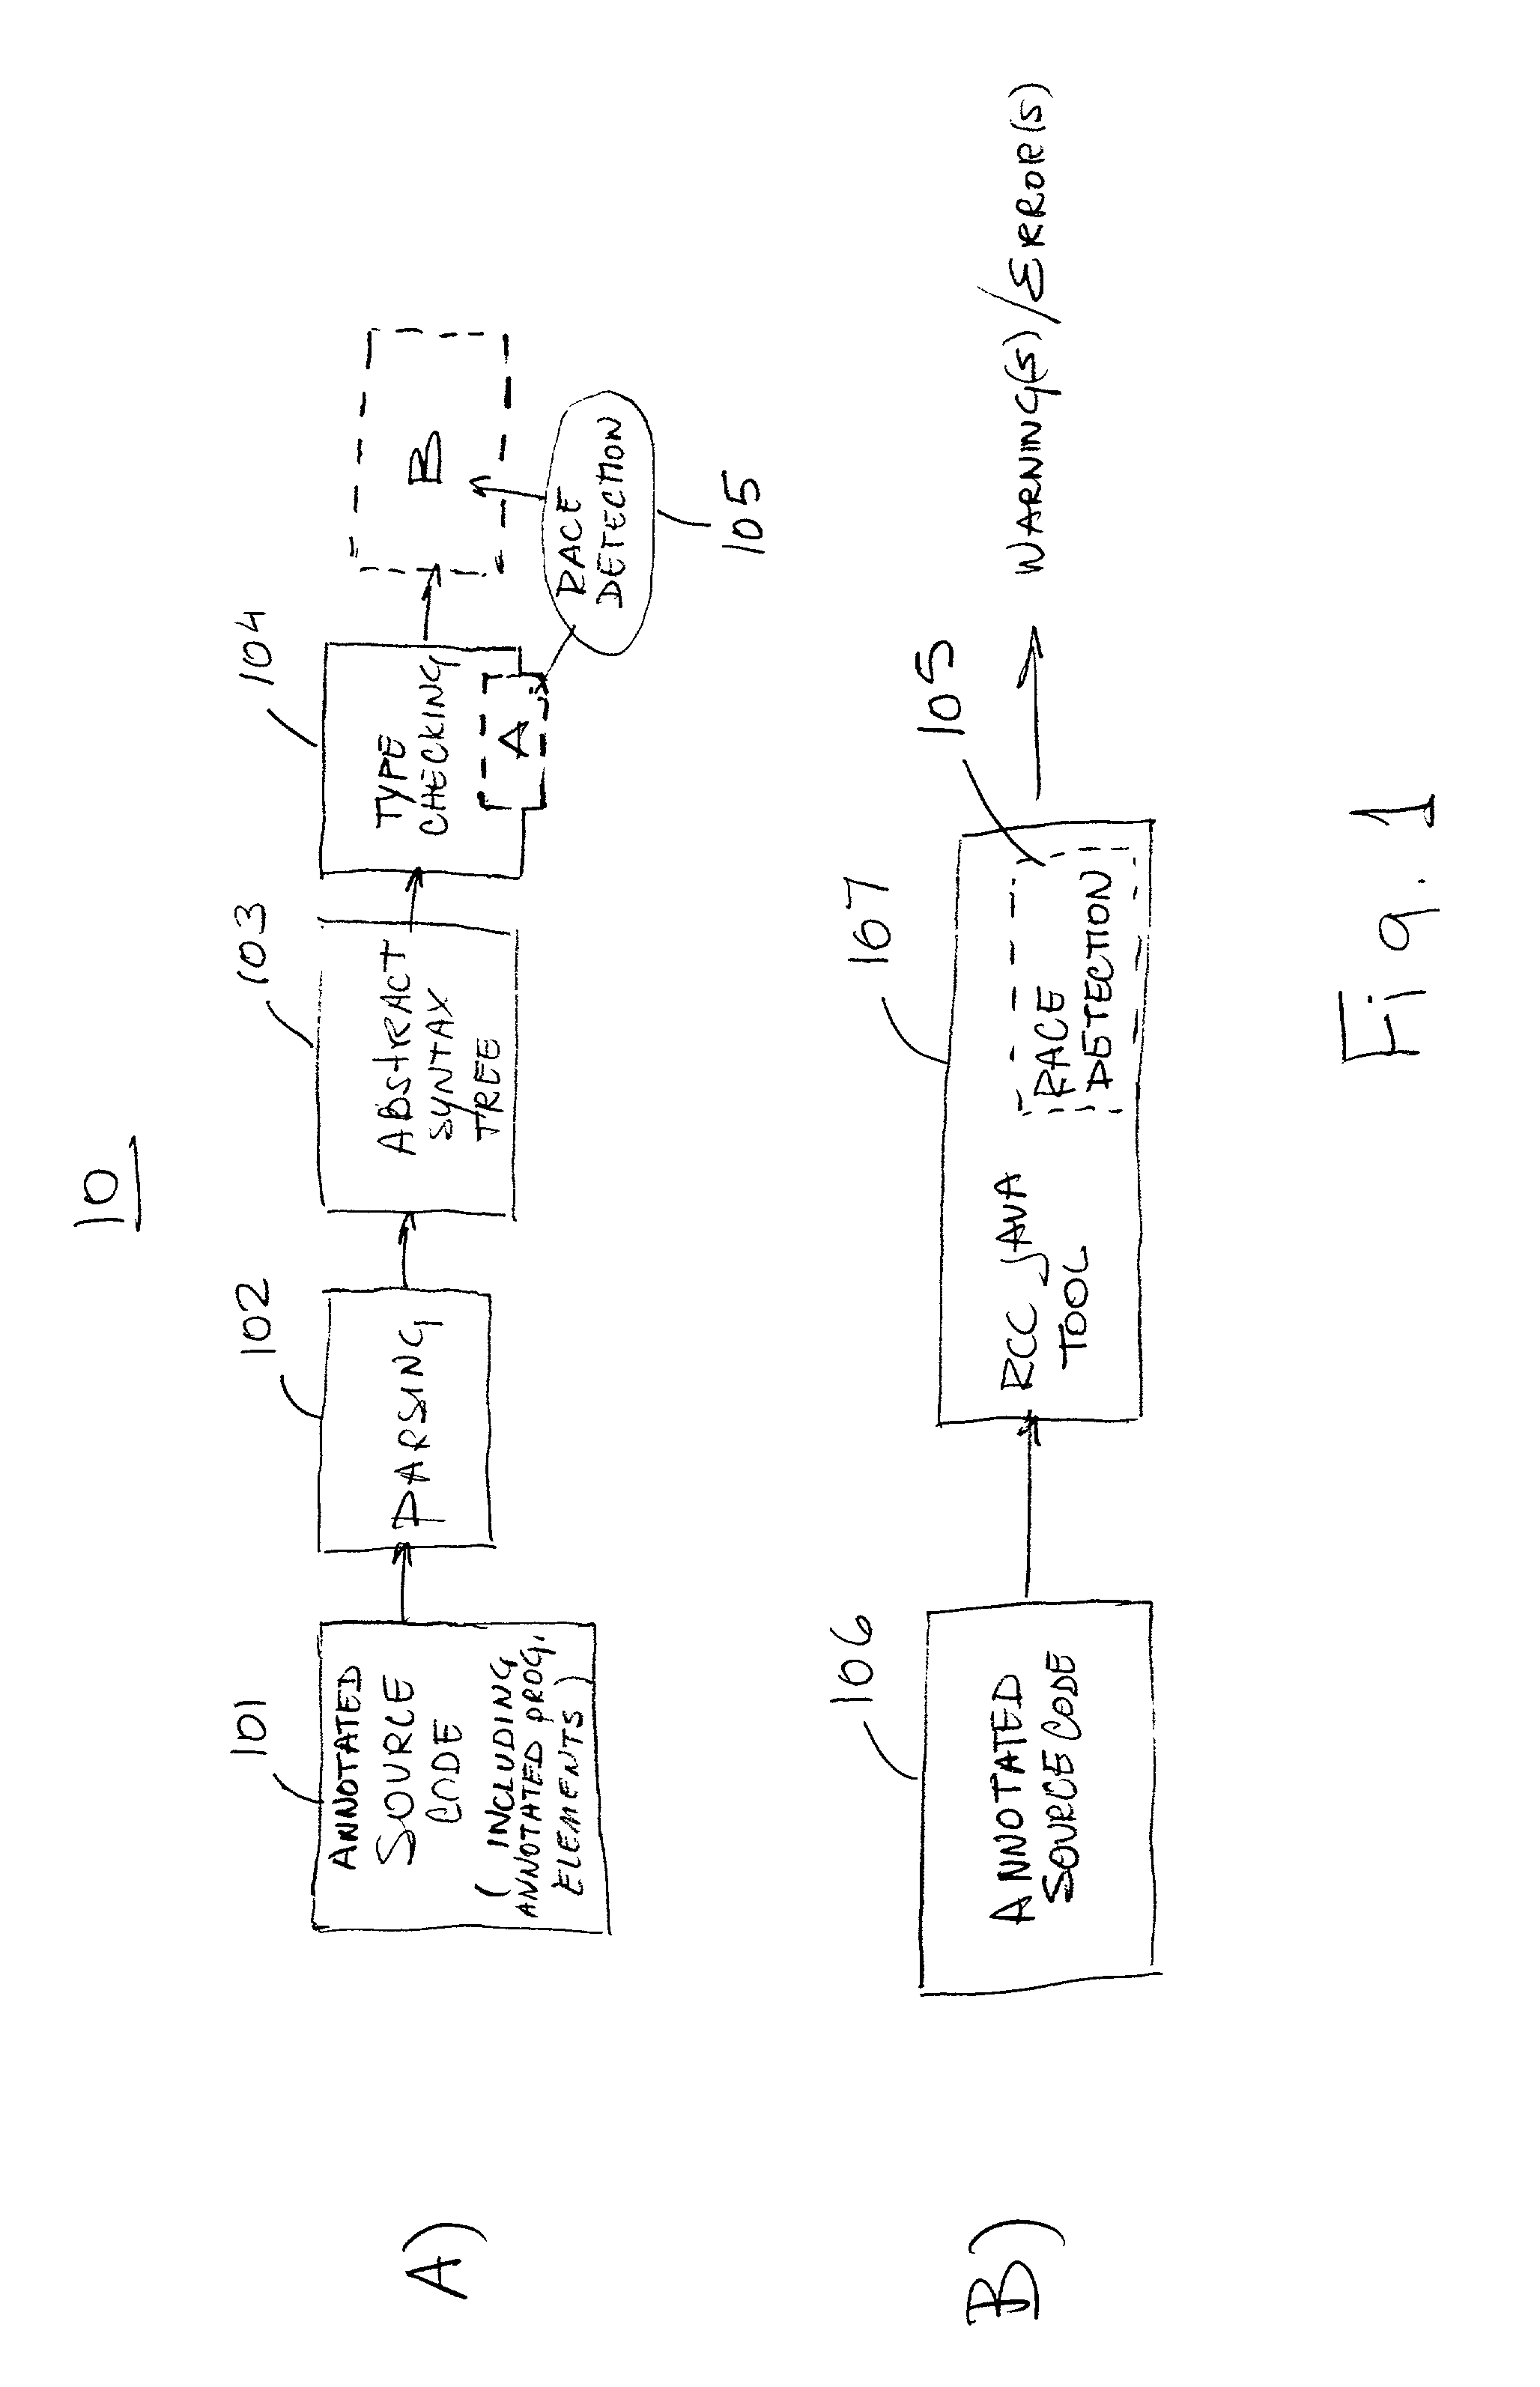 Method and apparatus for verifying data local to a single thread